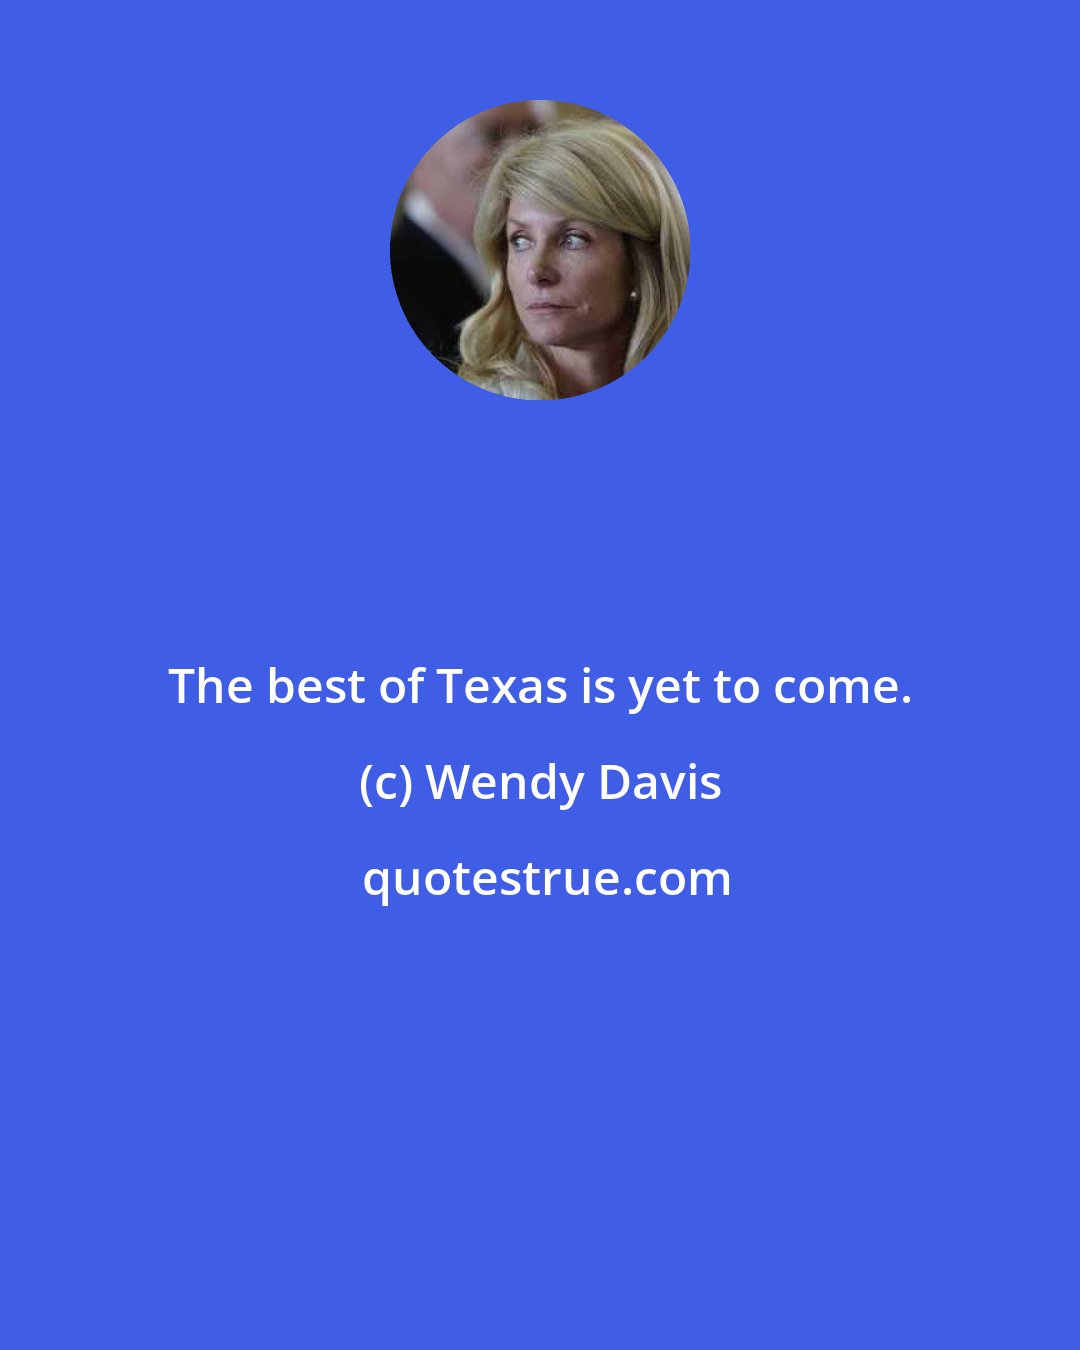 Wendy Davis: The best of Texas is yet to come.